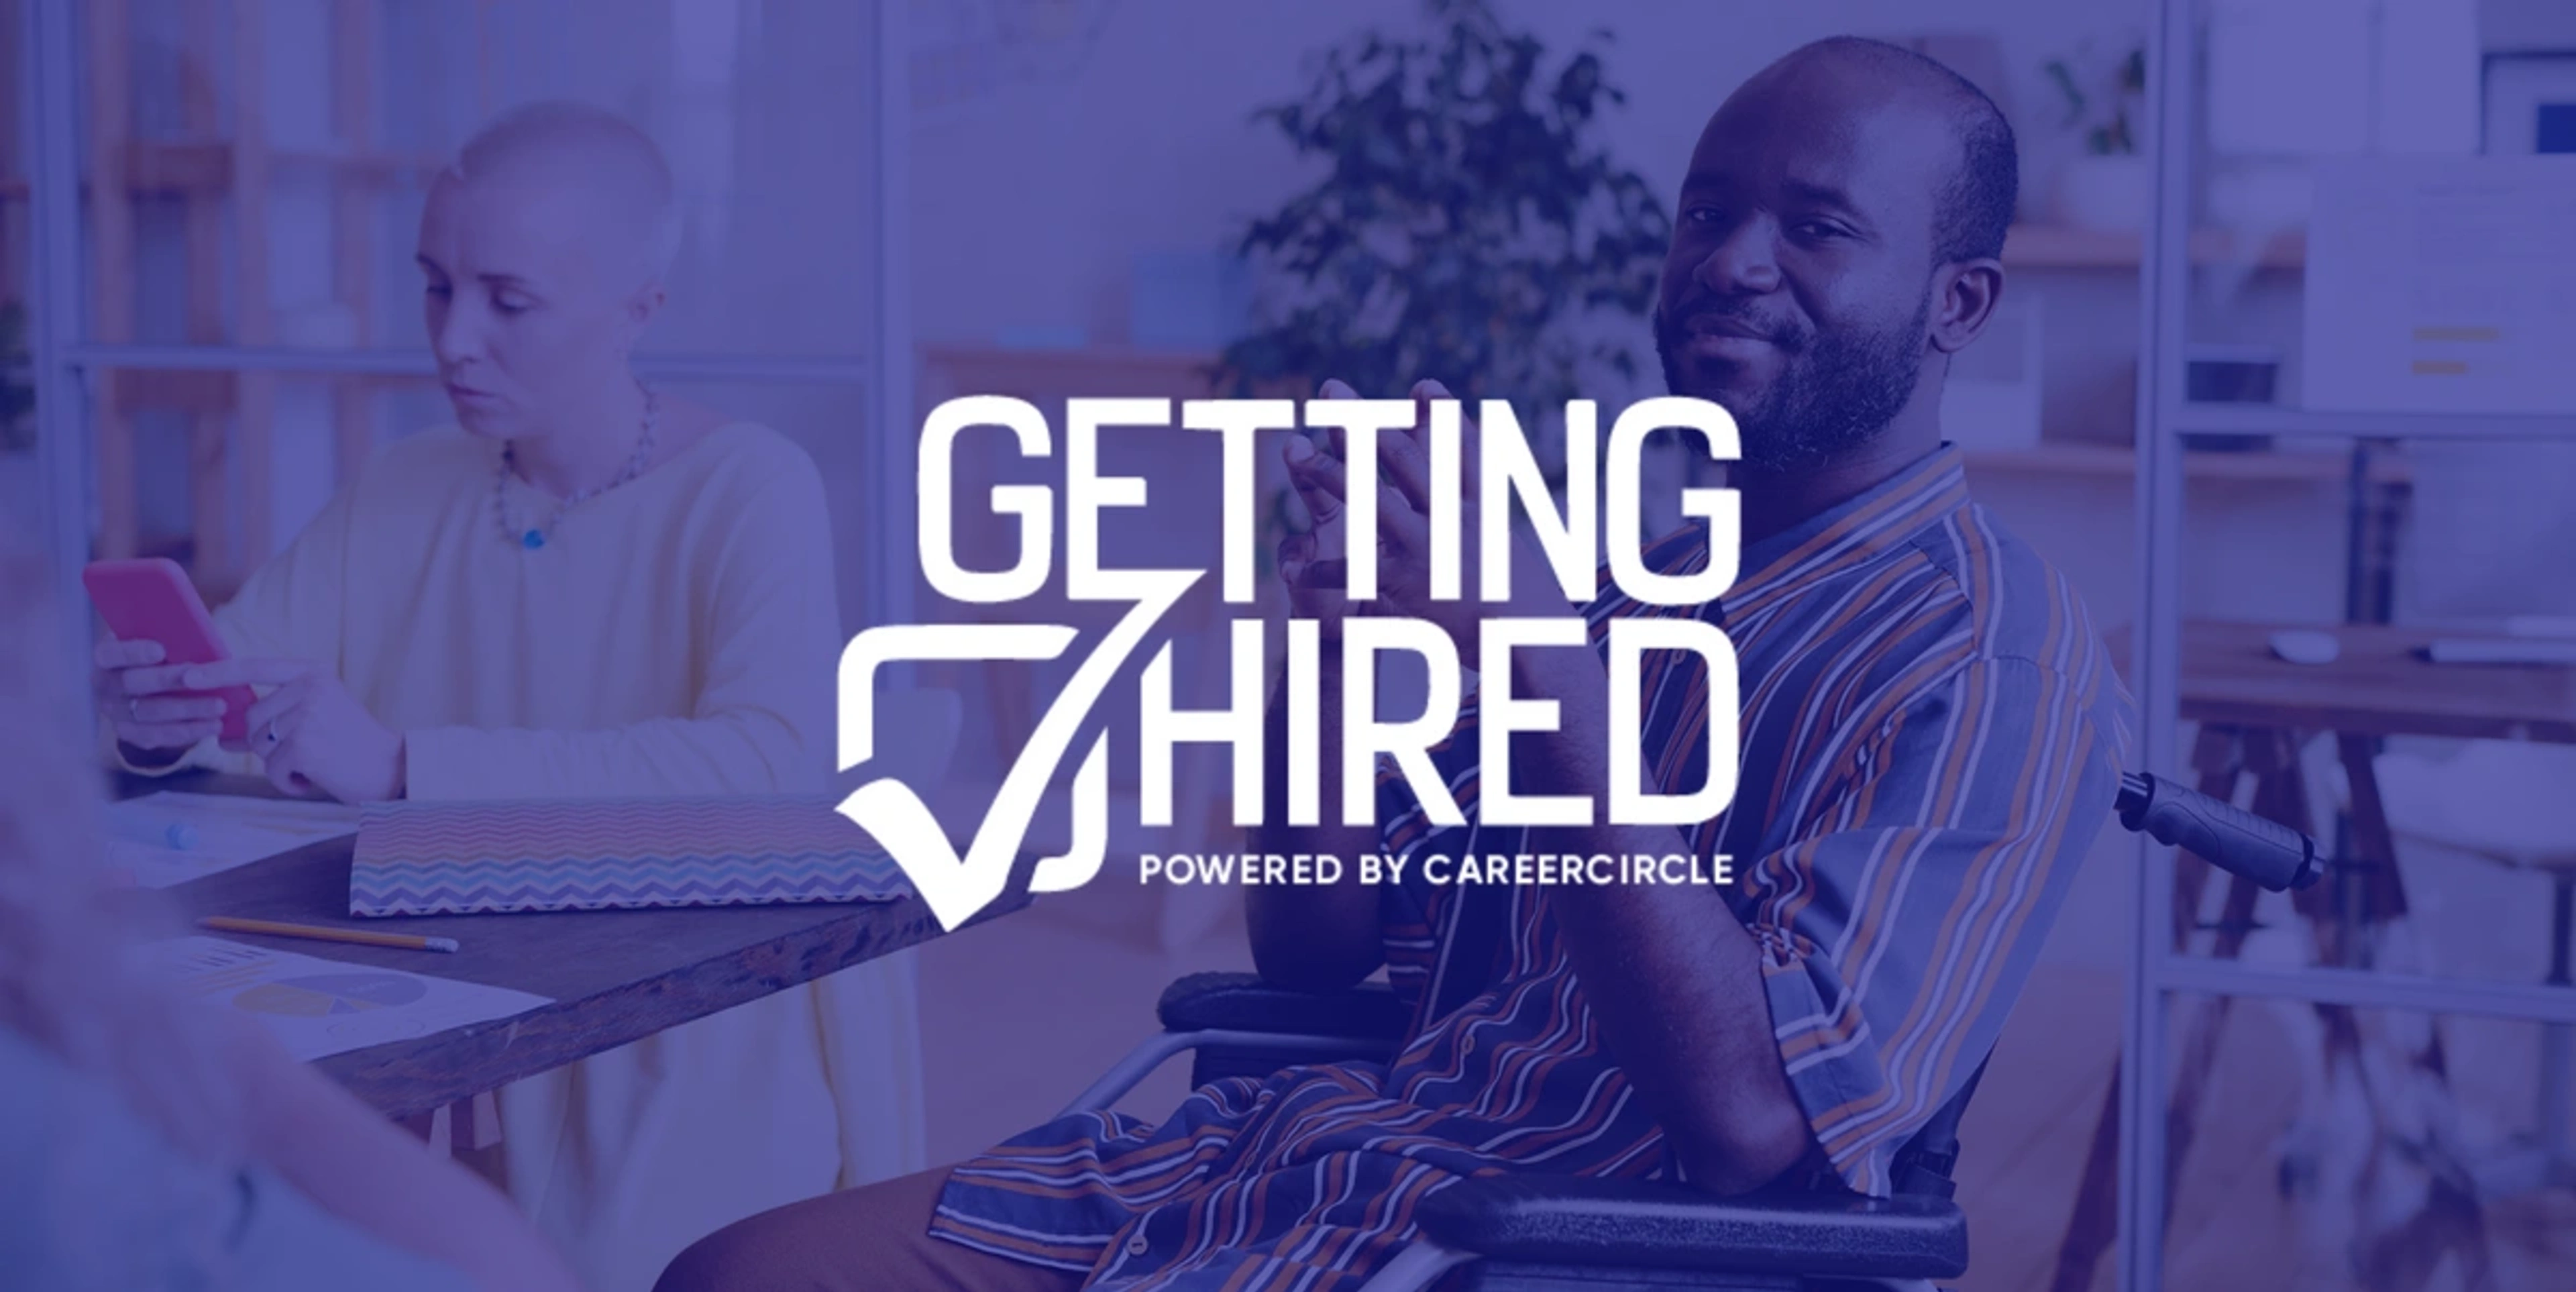 text says getting hired powered by careercircle, overlayed in blue over the image of a Black man